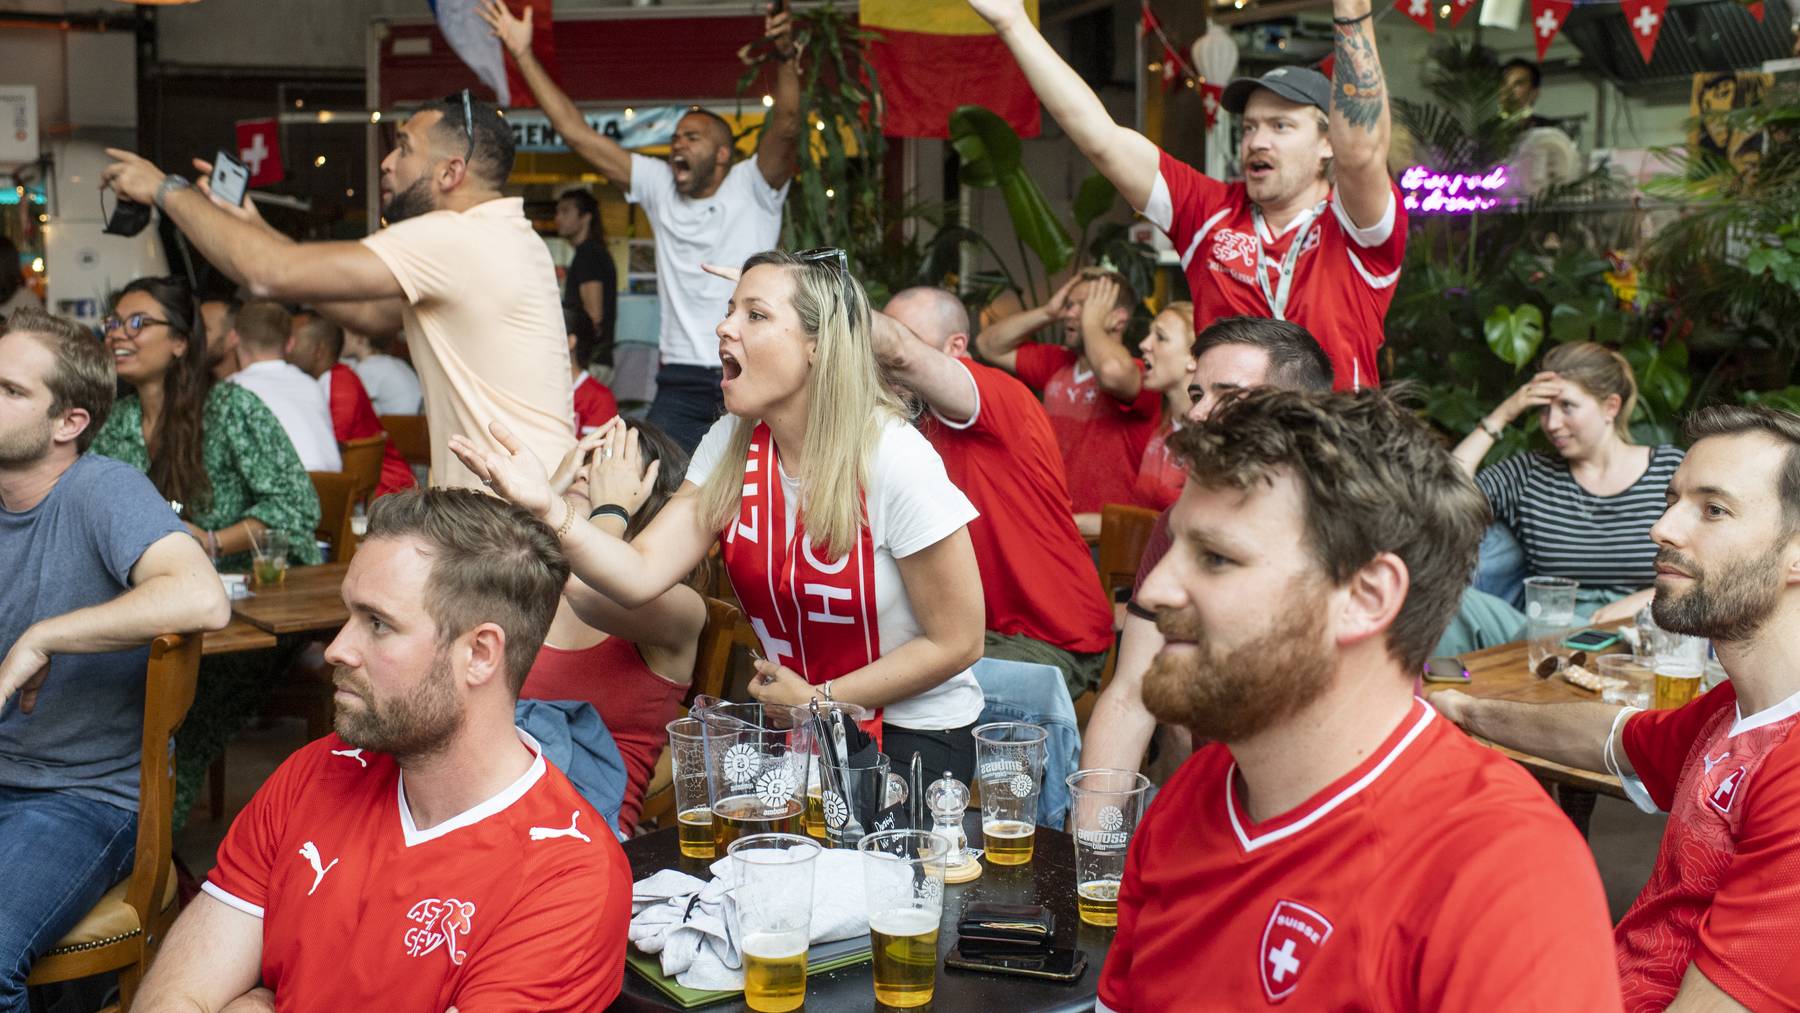 Swiss soccer fans react during the live broadcast of the UEFA EURO 2020 soccer match between Spain and Switzerland at the Amboss Rampe in Zurich, Switzerland, Friday, 2. July 2021. // Public Viewing Fussball-Fans Public-Viewing